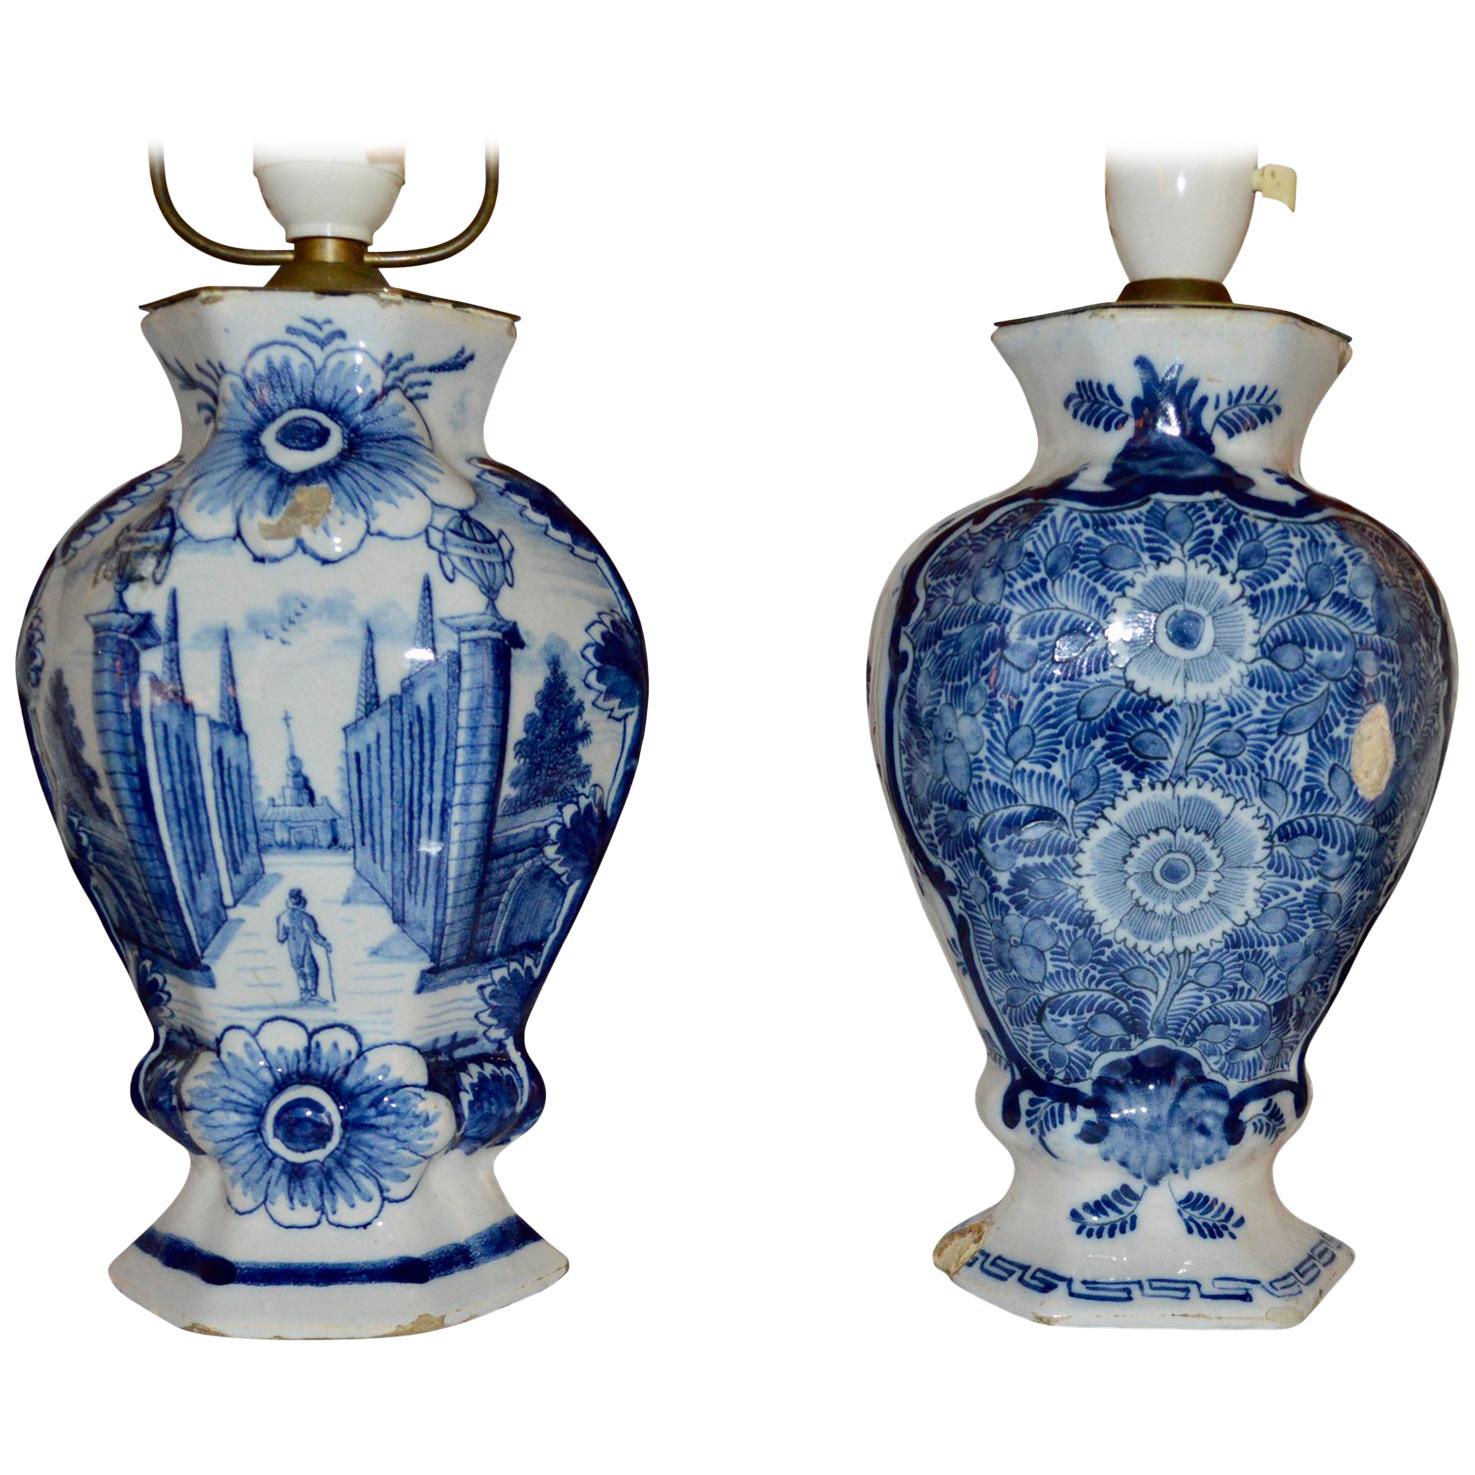 Pair Of 18th Century Blue And White Delft Table Lamps